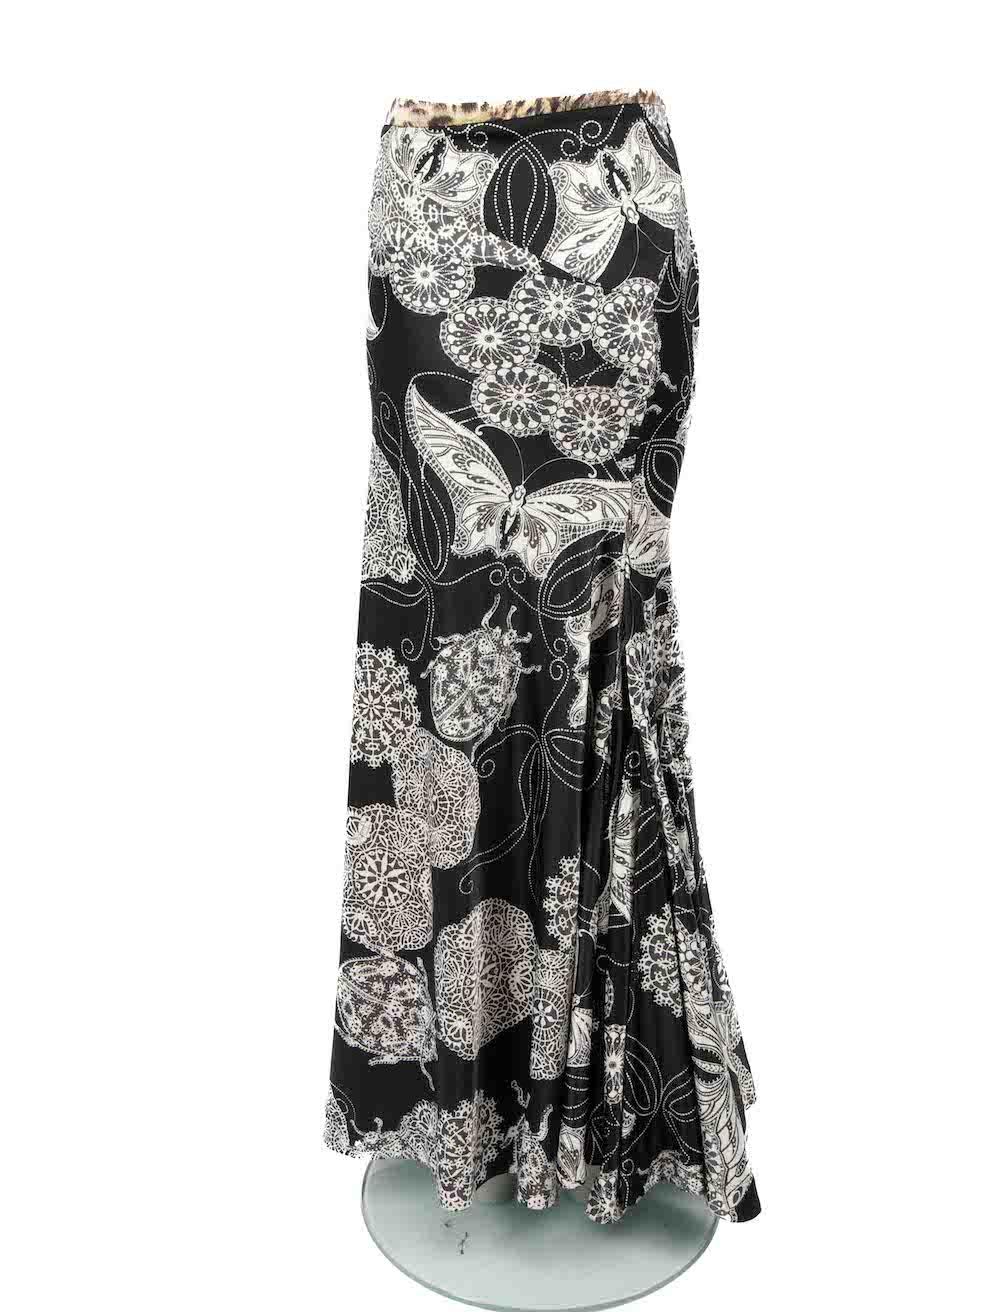 Roberto Cavalli Just Cavalli Black Lace Print Maxi Skirt Size S In Excellent Condition For Sale In London, GB